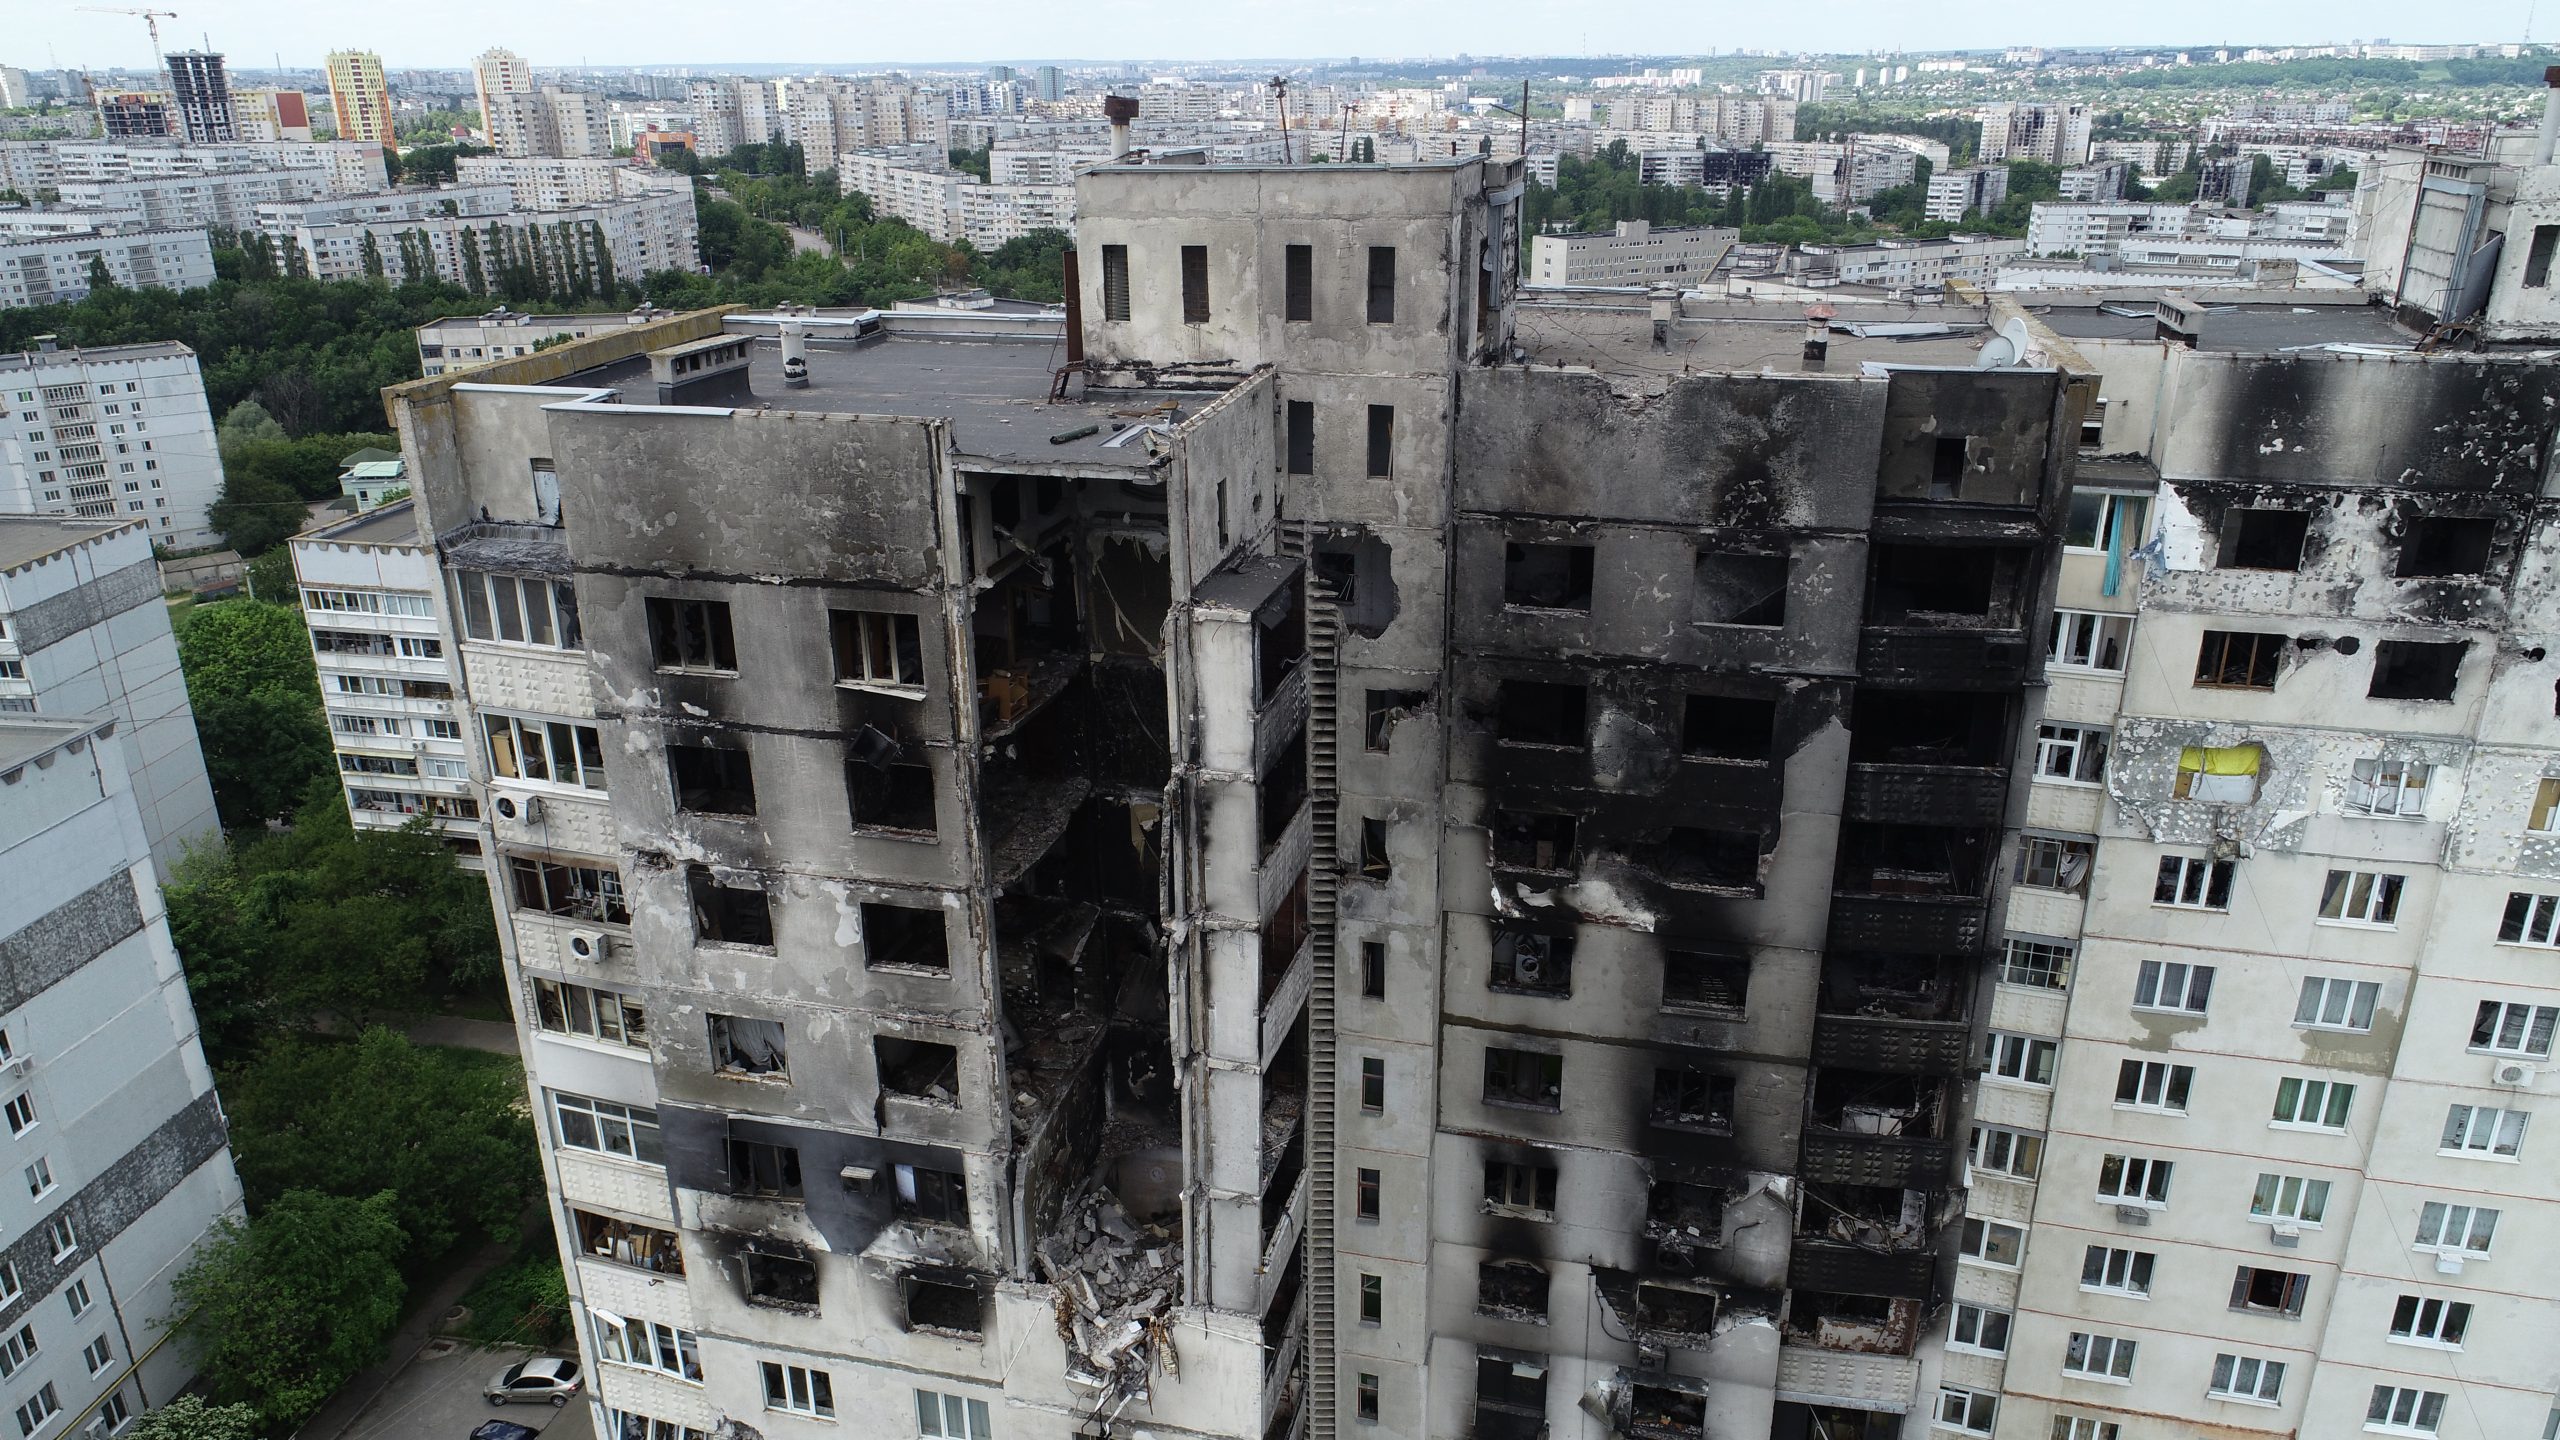 Kharkiv. Destroyed apartment building in North Saltivka residential district. As seen from the drone on Jun 7, 2022.